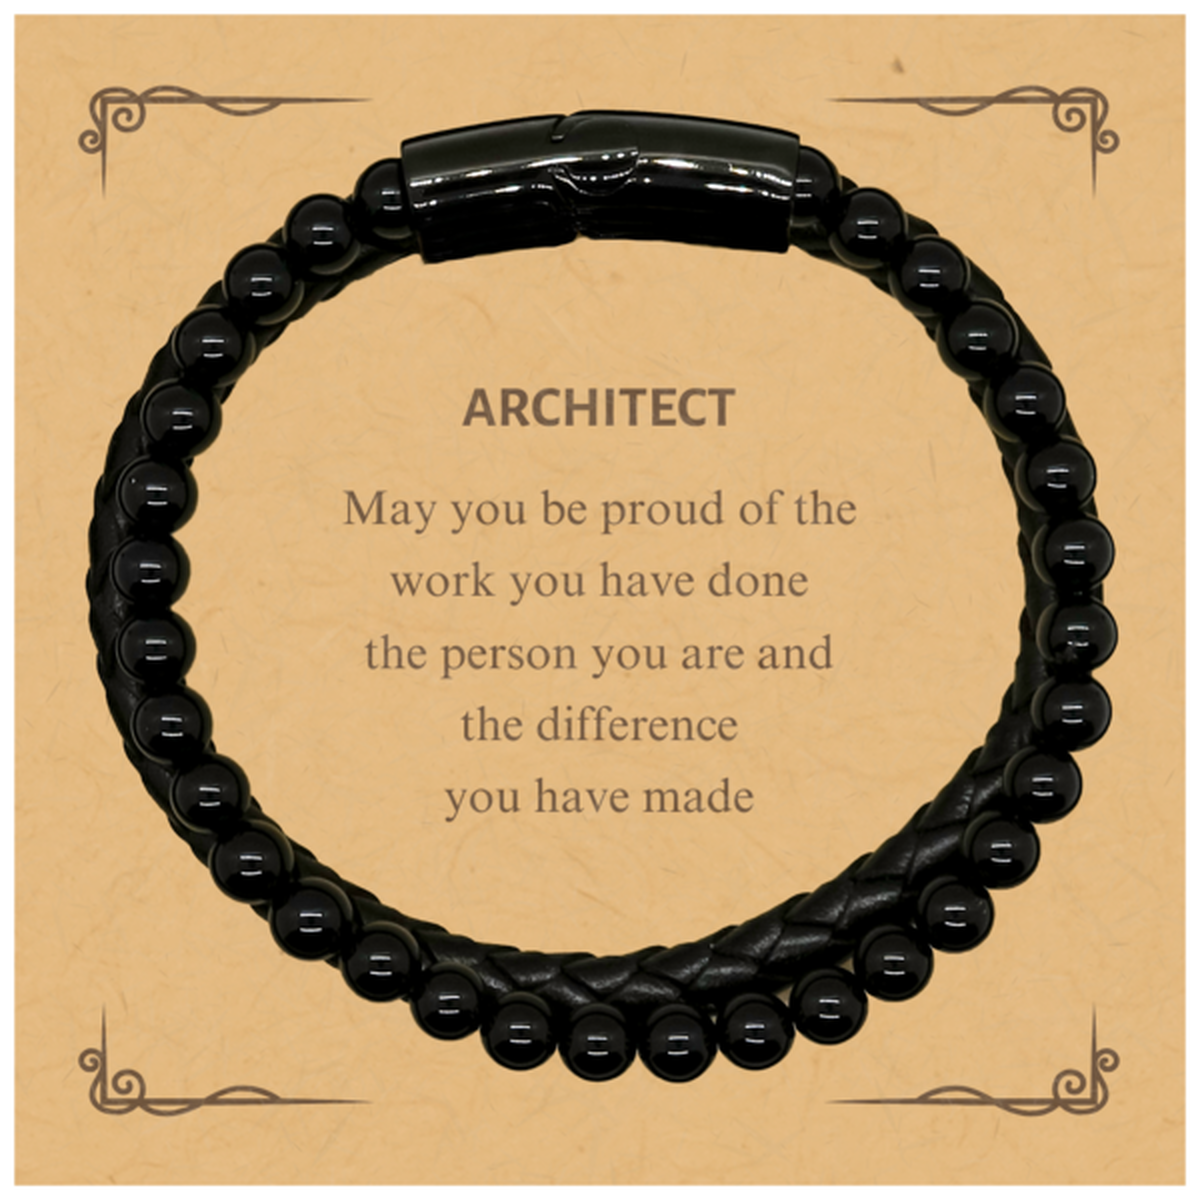 Architect May you be proud of the work you have done, Retirement Architect Stone Leather Bracelets for Colleague Appreciation Gifts Amazing for Architect